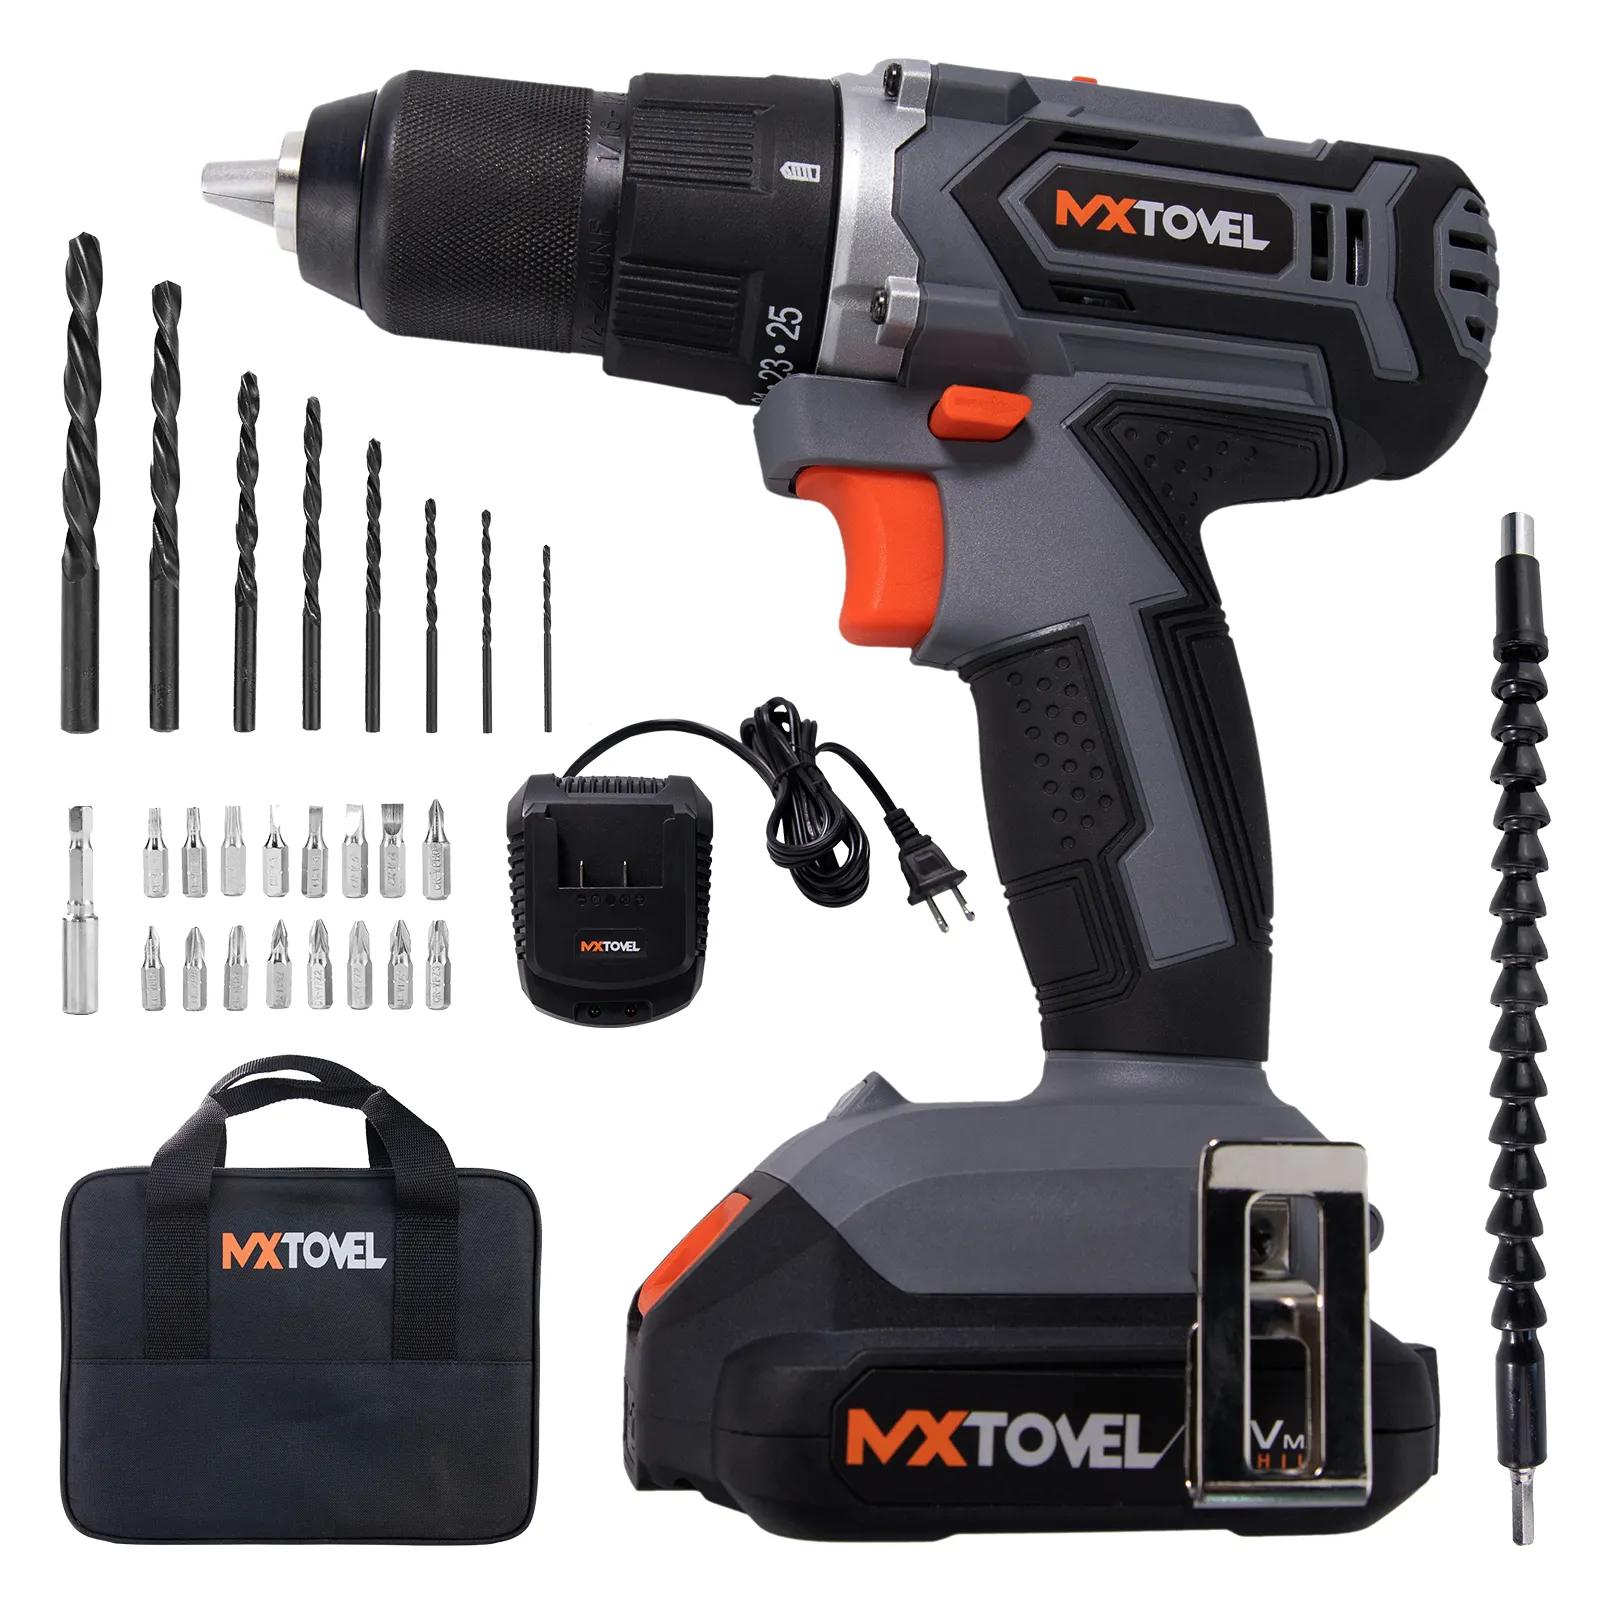 18v Cordless Drill MXTOVEL Wholesale Professional Original Portable Electrical 18V Lithium Battery Power Tools Charger Cordless Drills Screwdriver